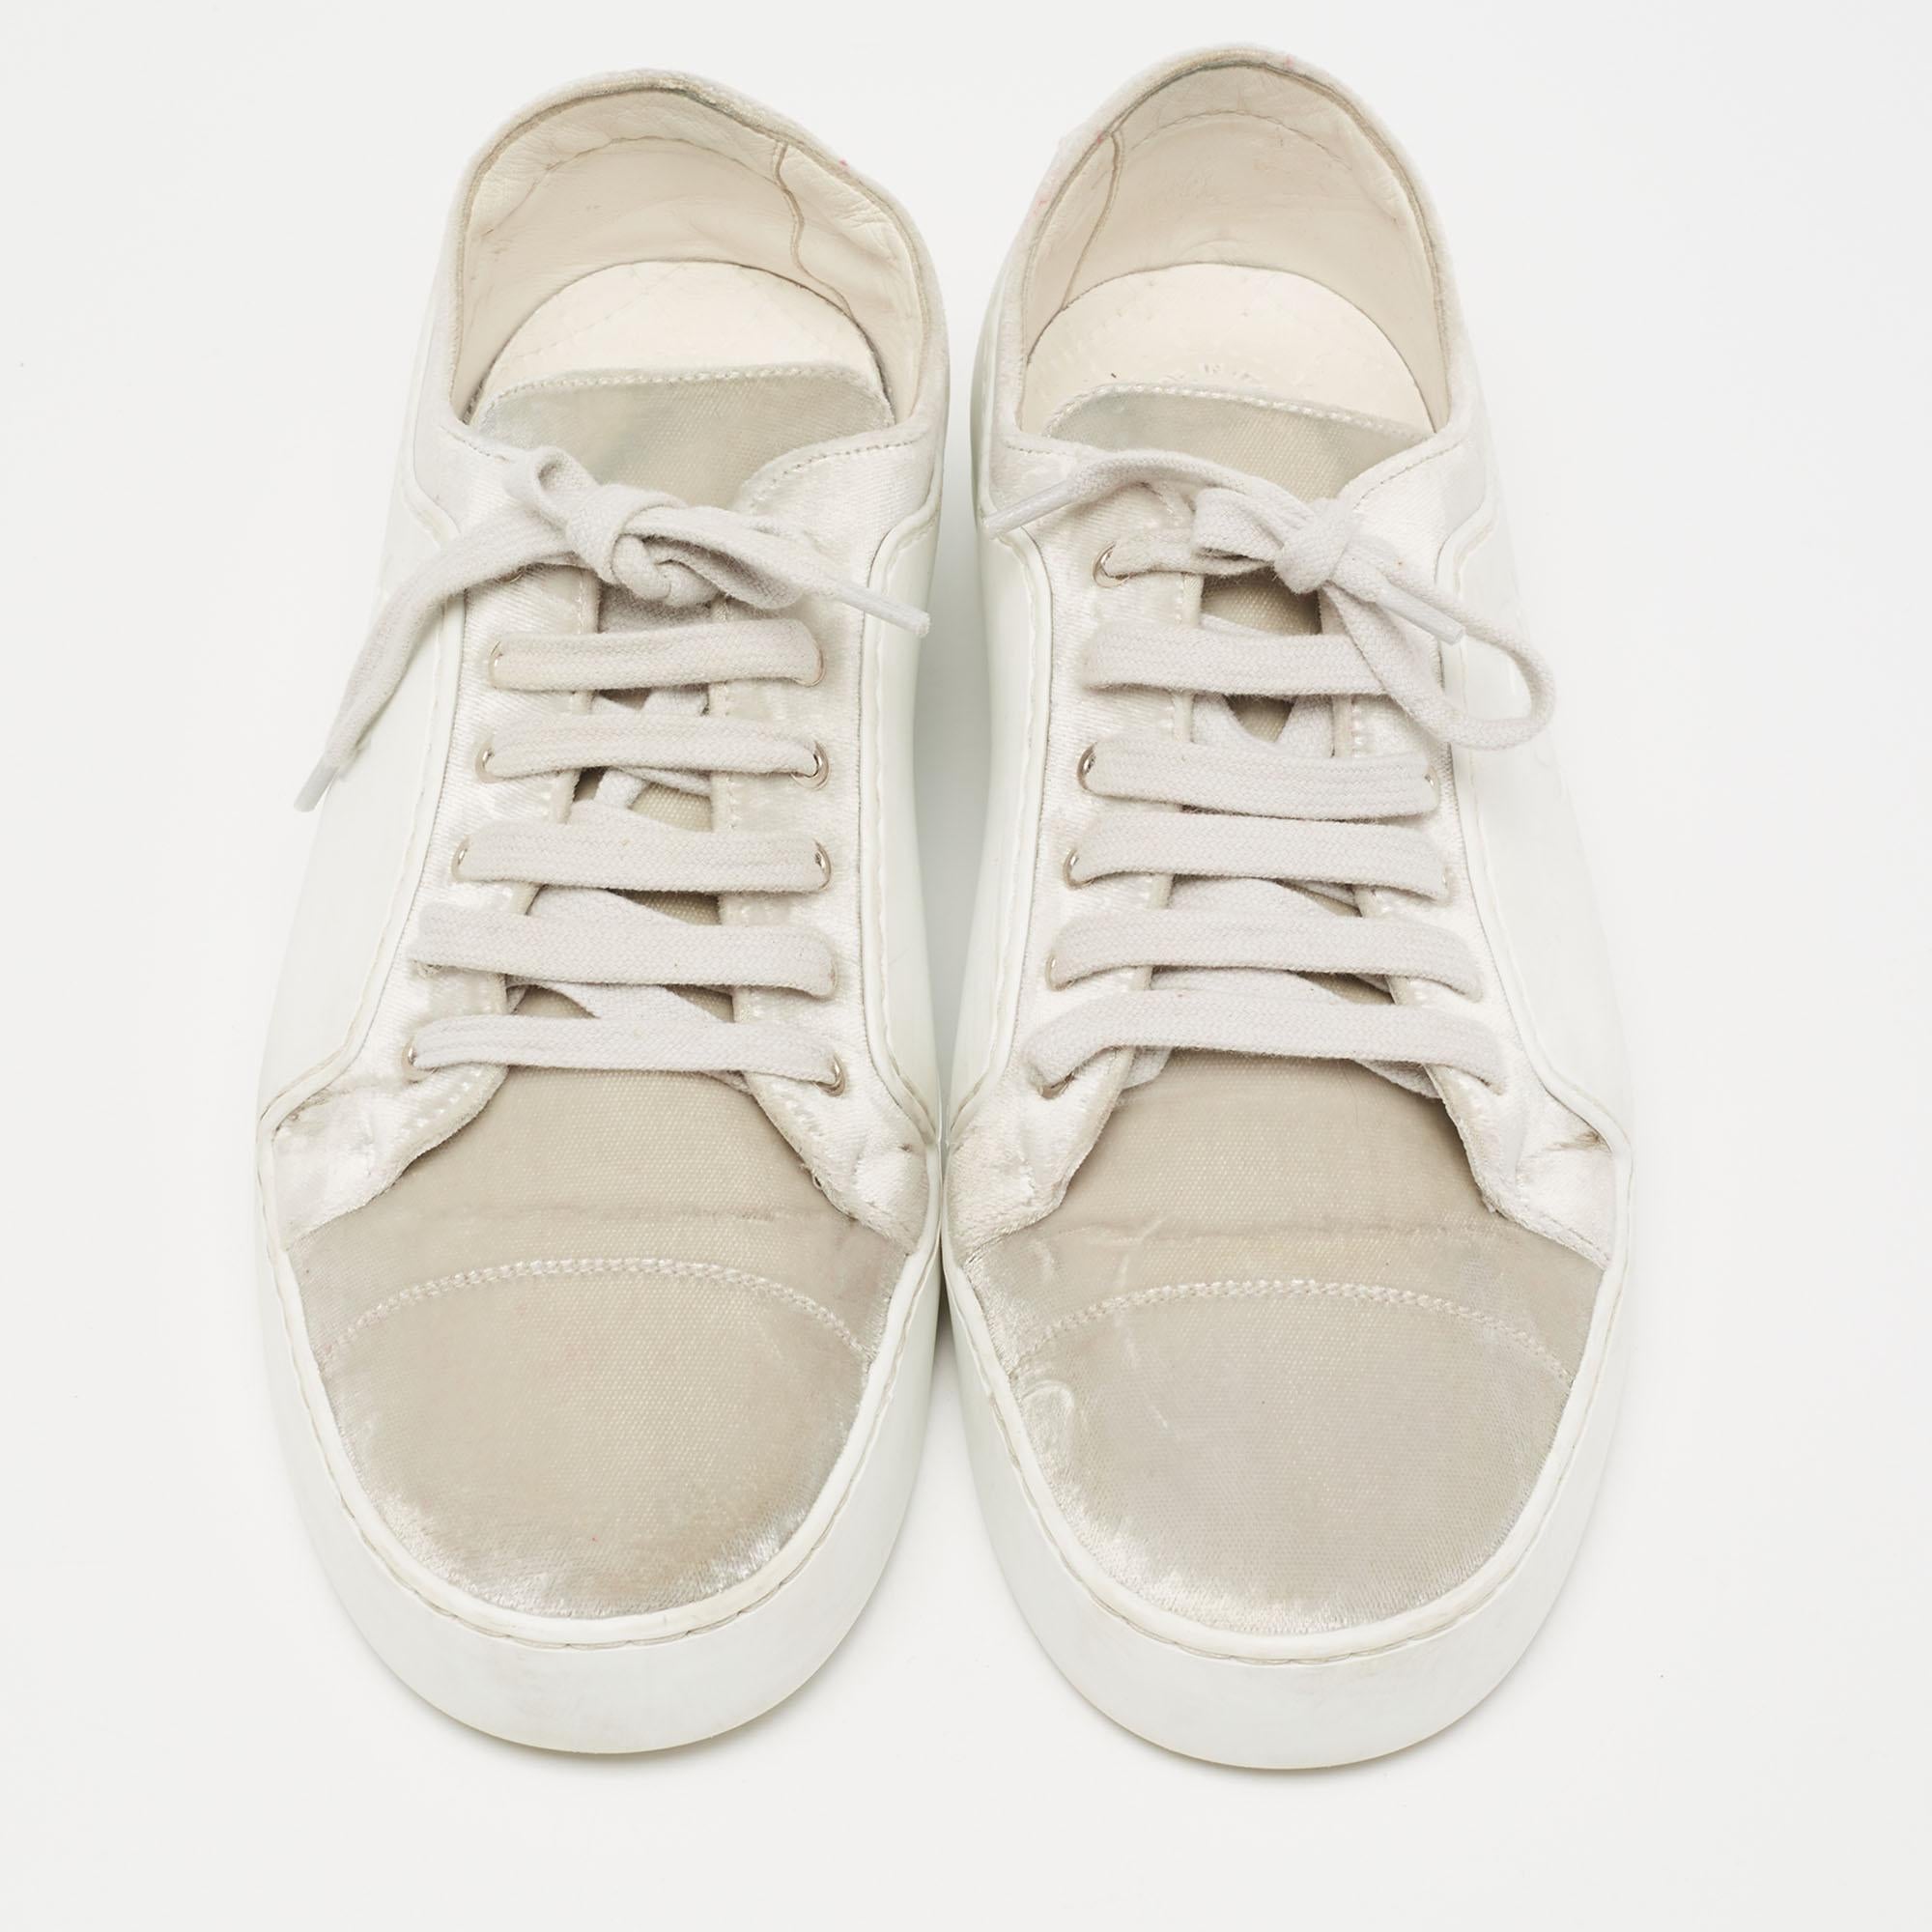 Designed into a low-top style, these Chanel sneakers are not just stylish in appeal but also comfortable to wear. Crafted from quality materials, they are designed with CC logos on the sides. Finished off with laces on the vamps, these kicks still